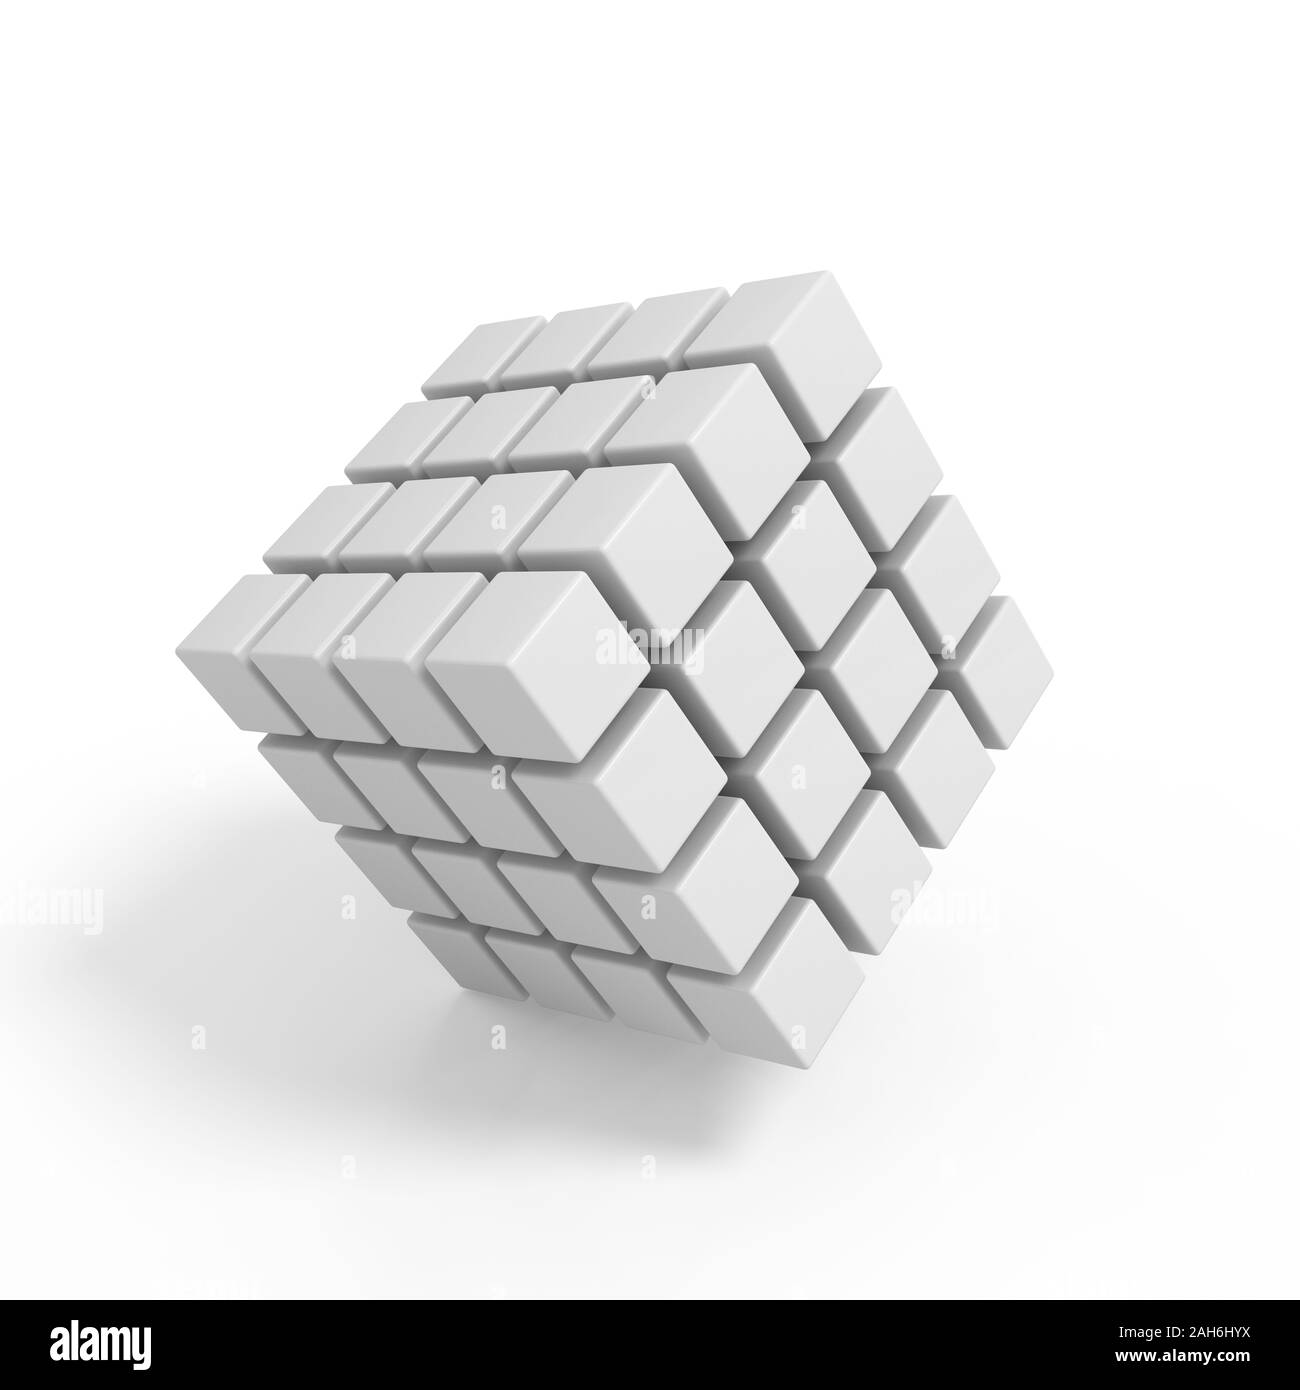 Business concept - 3D block cubes render on white Stock Photo - Alamy